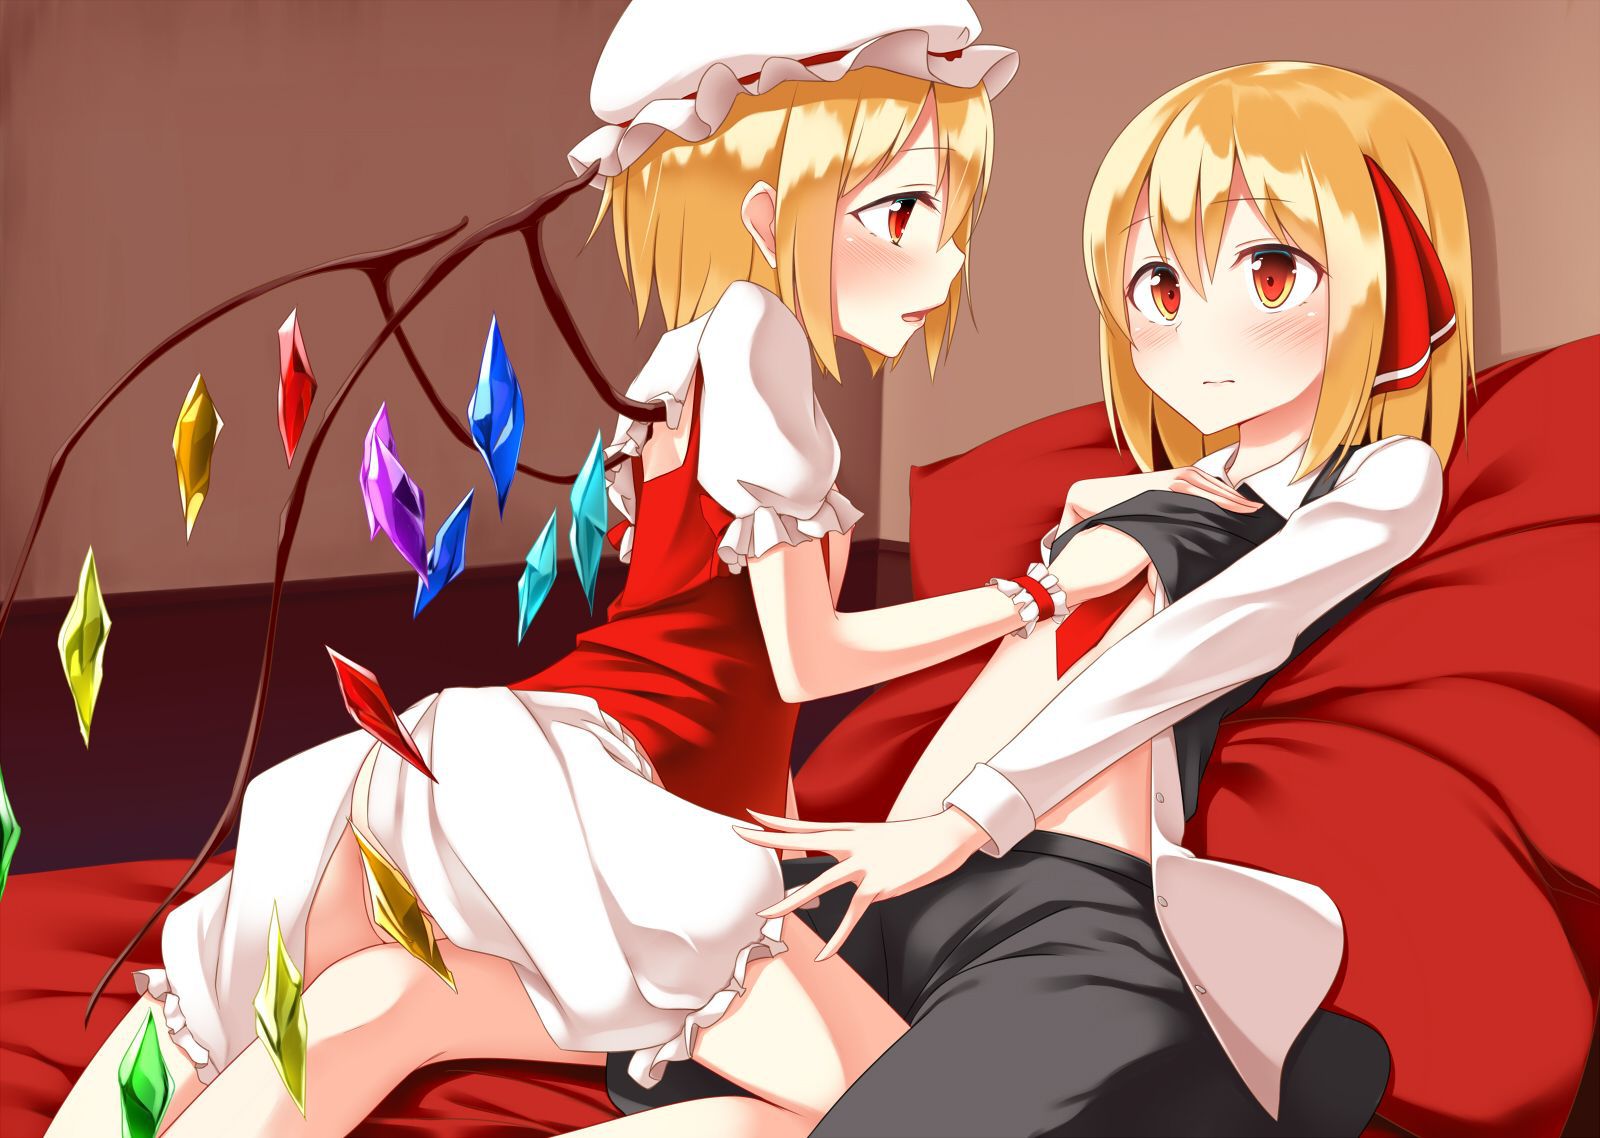 [Secondary-ZIP: Yuri lesbian image, or see other girls doing naughty things. 14